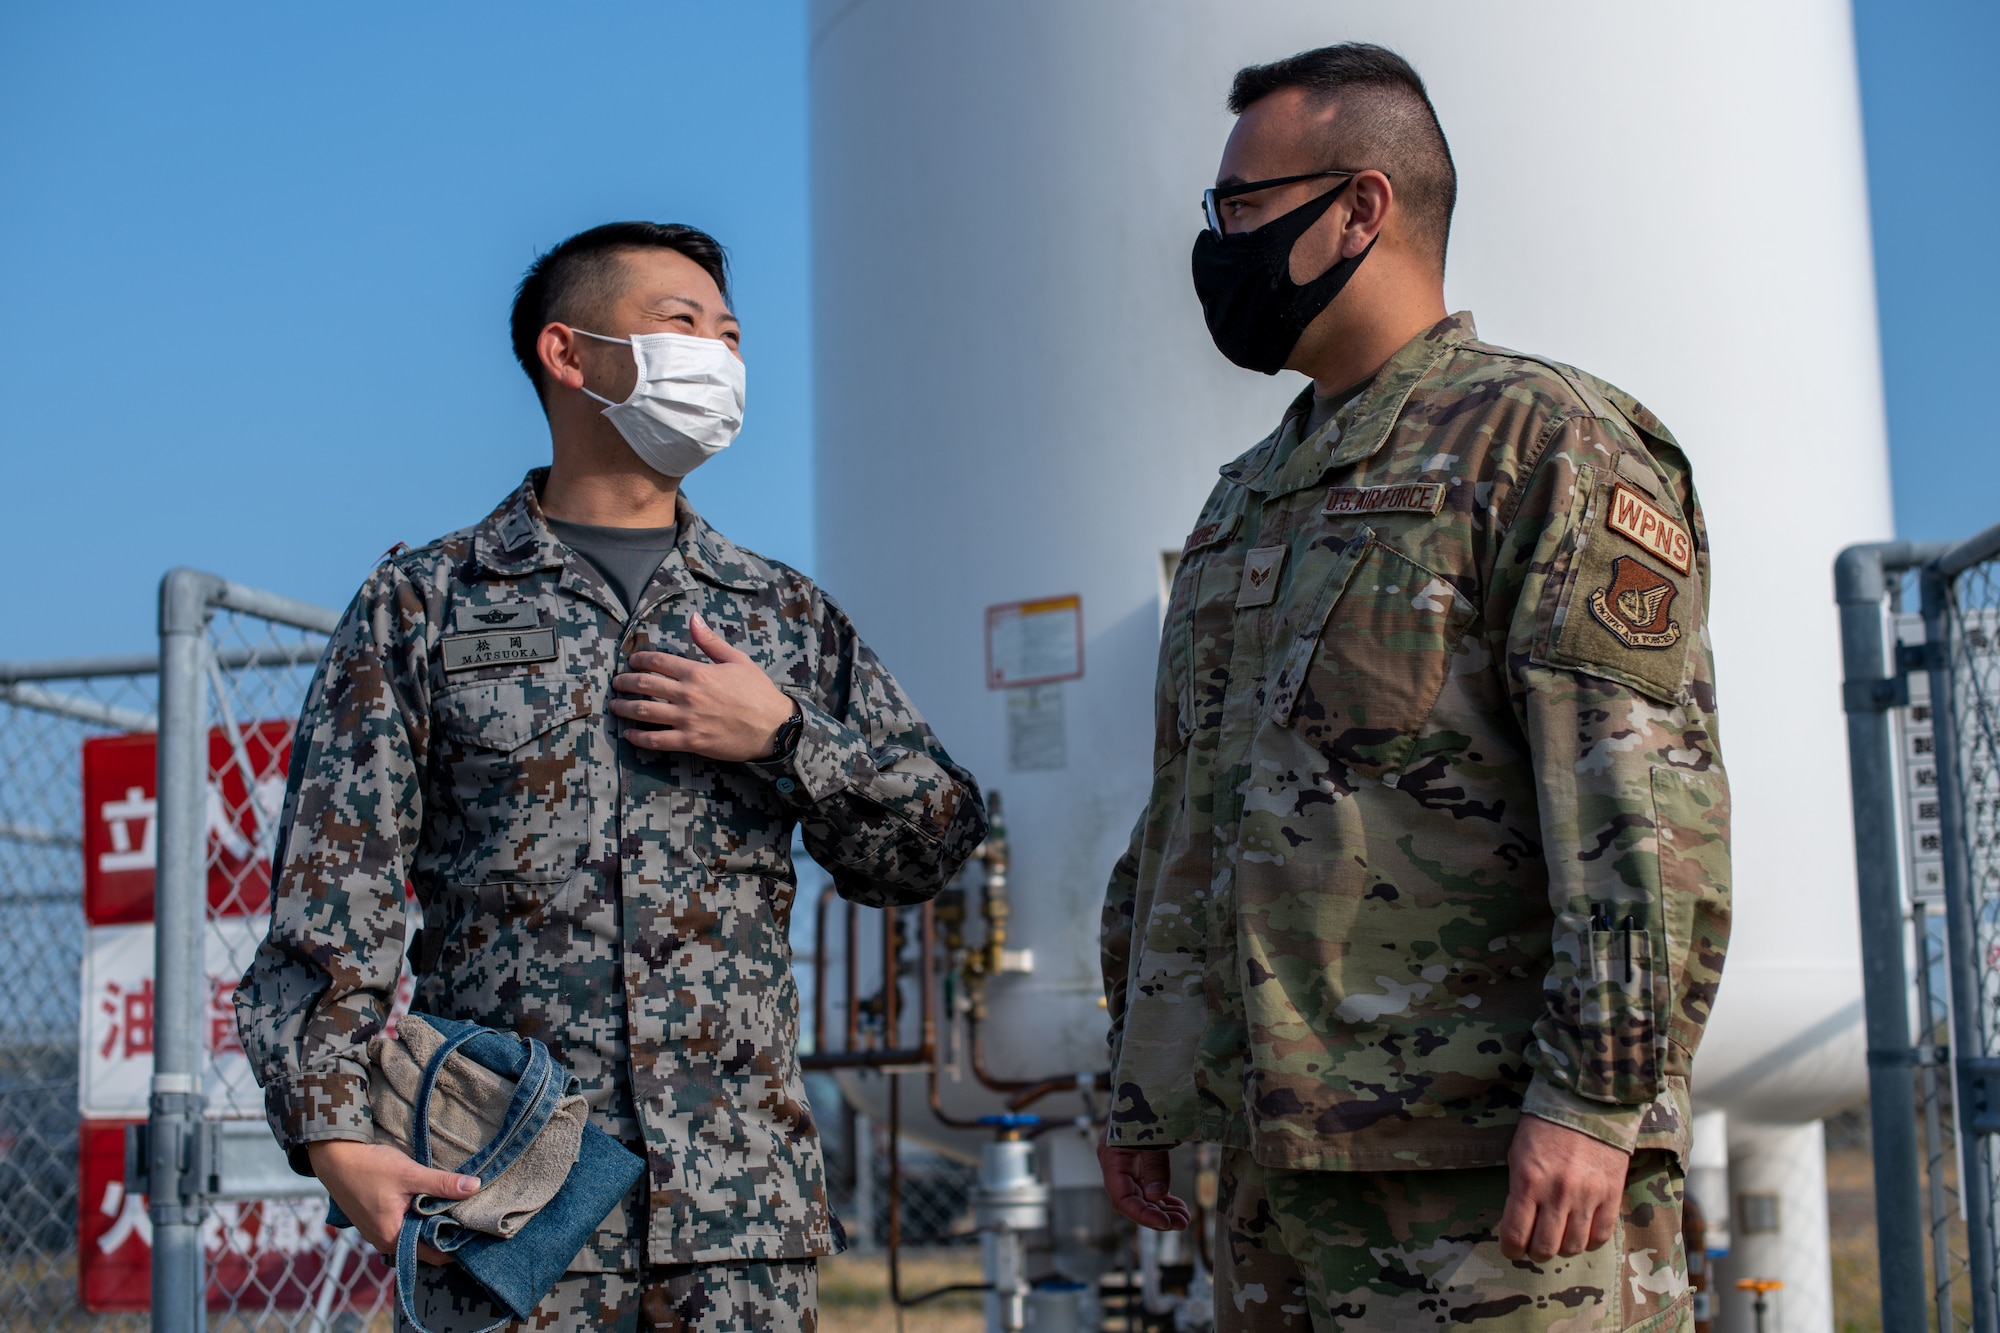 An Airman and Japan military member speak to each other.